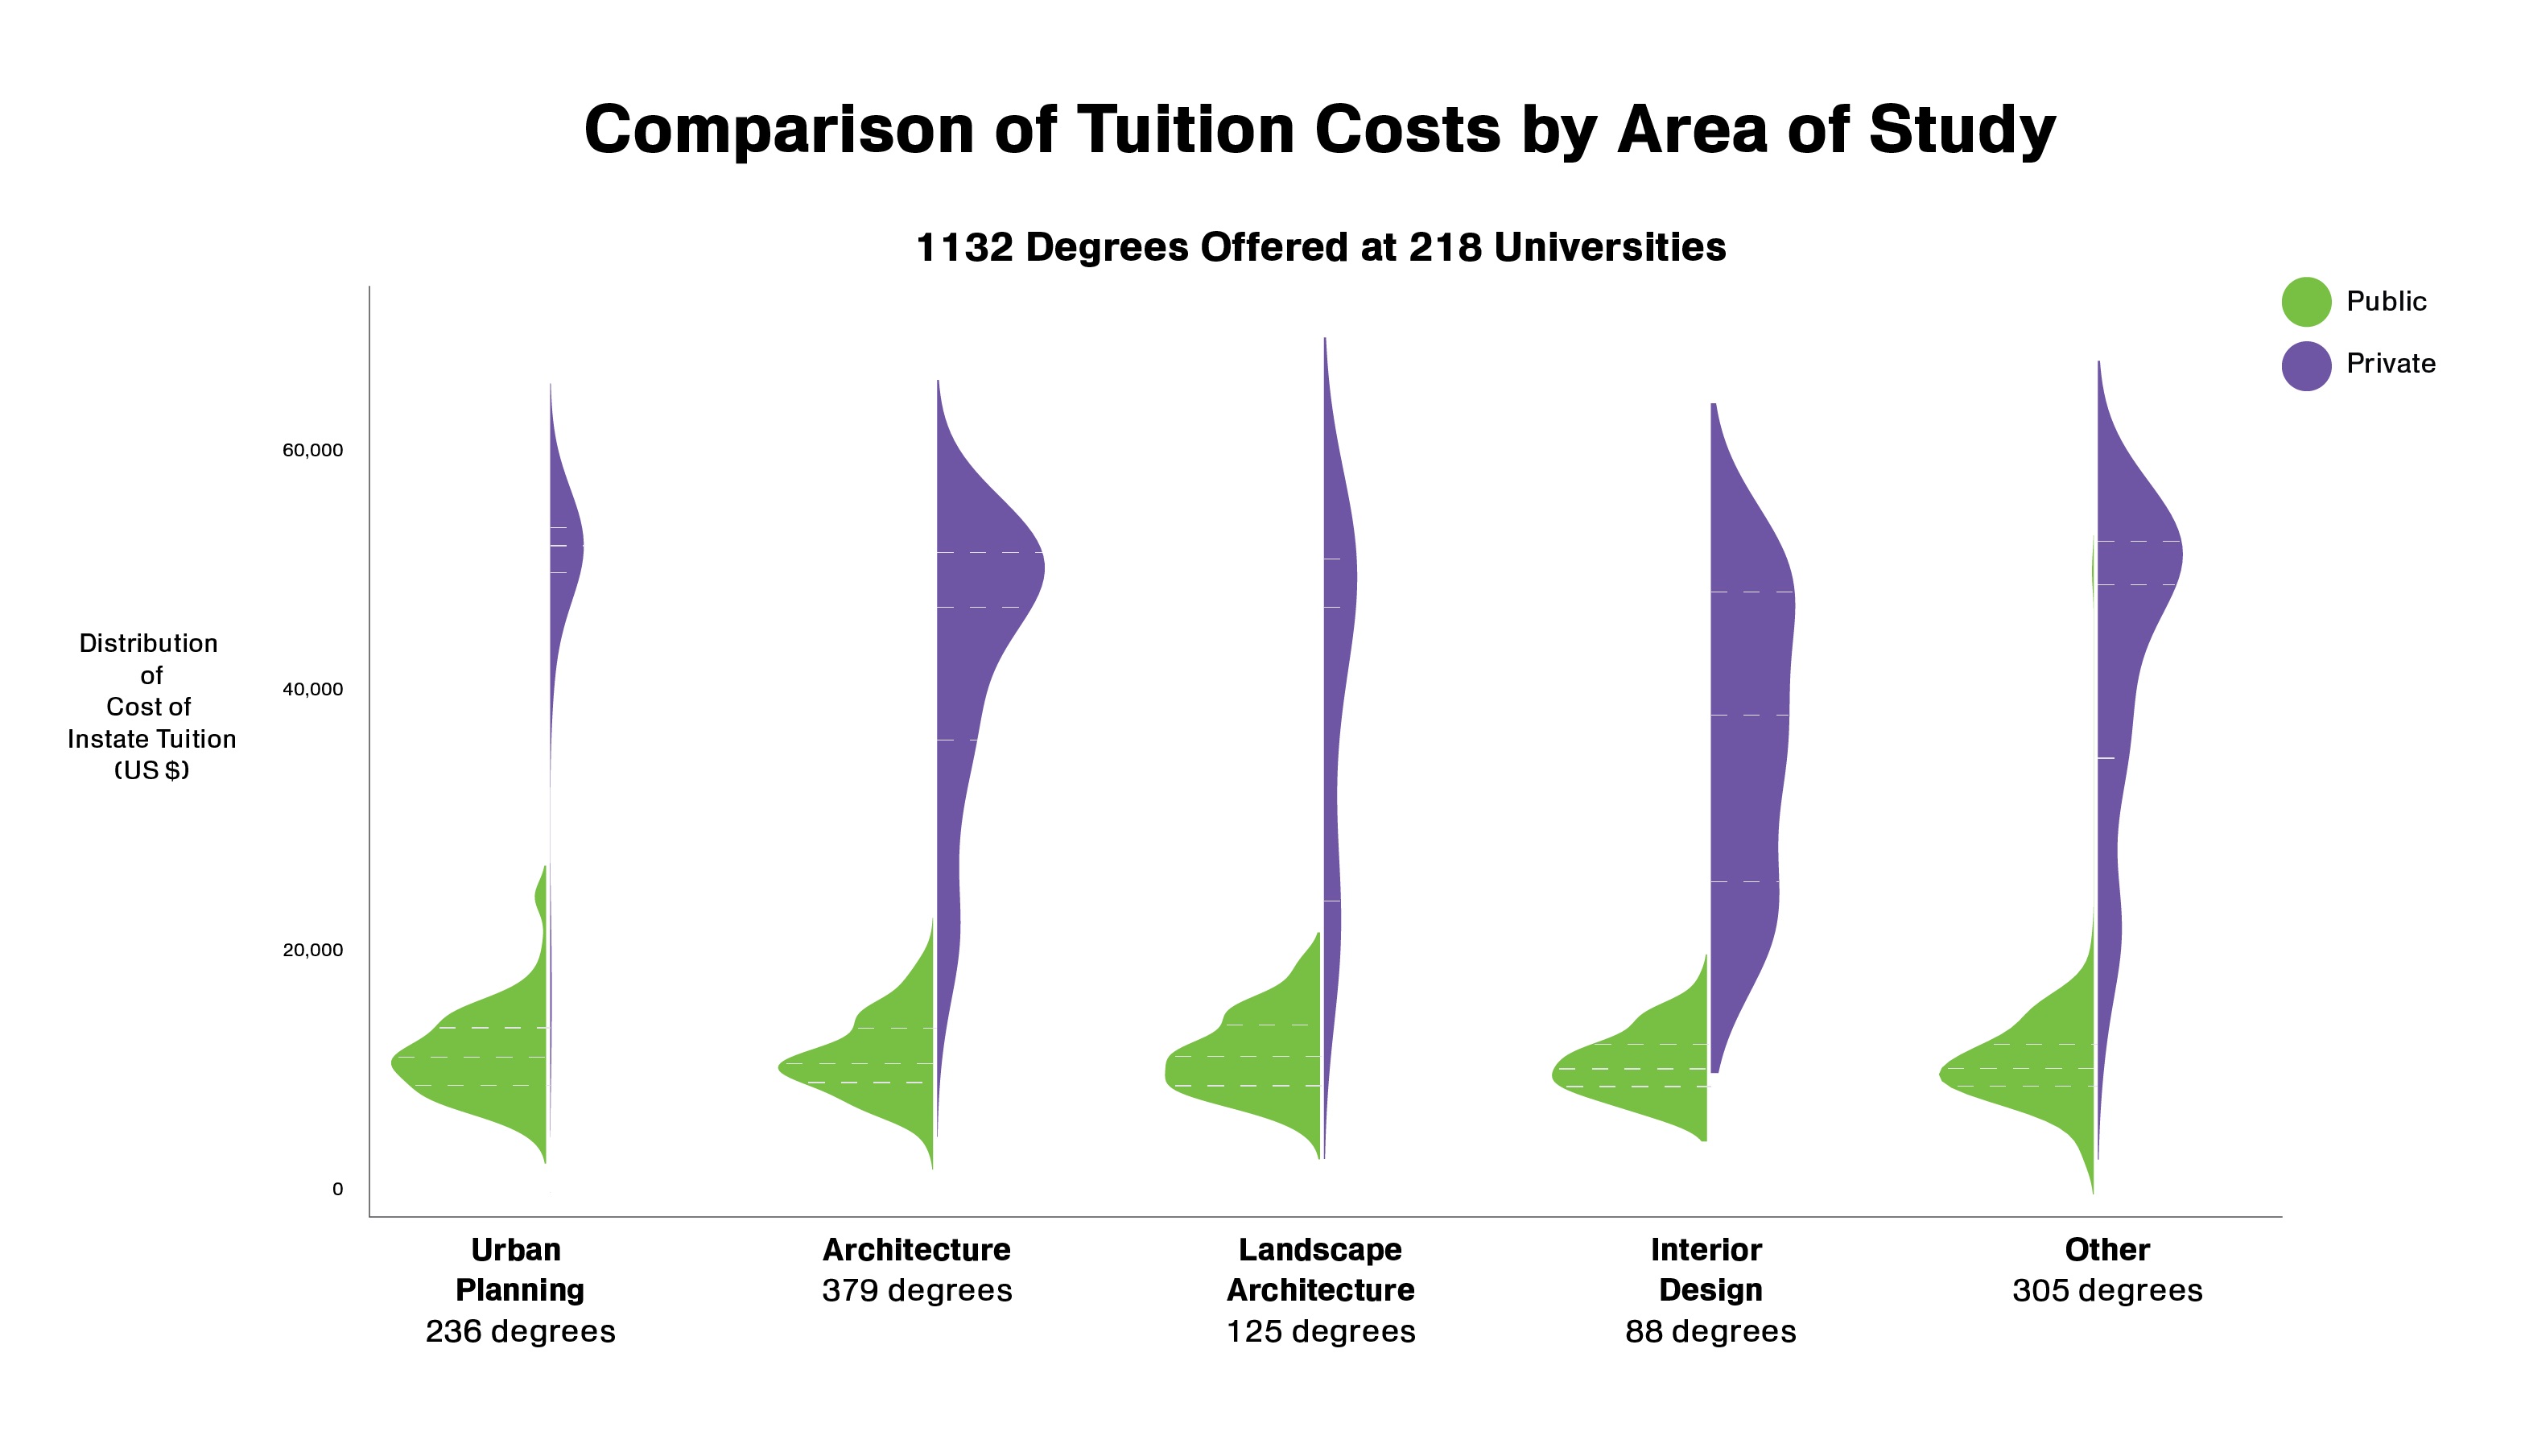 Comparison of Tuition Costs by Area of Study